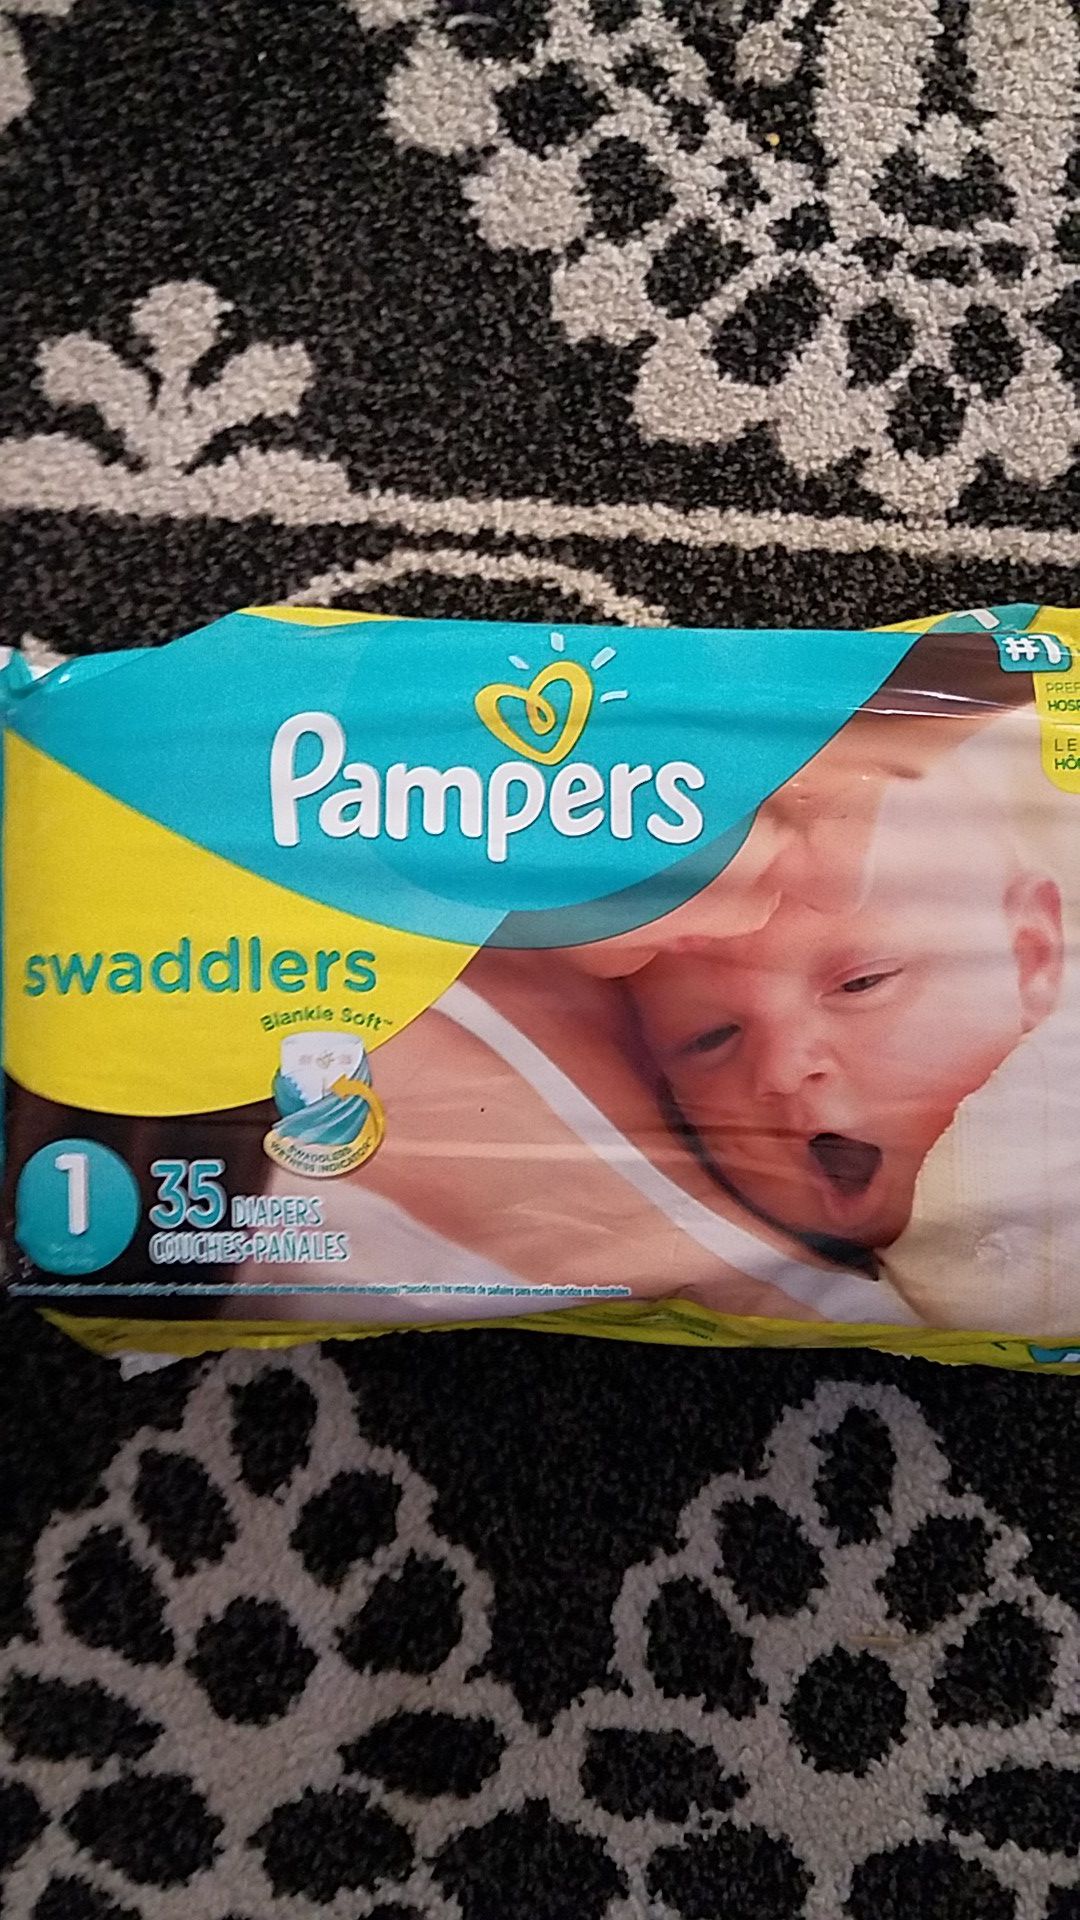 1 Pampers 35 diapers